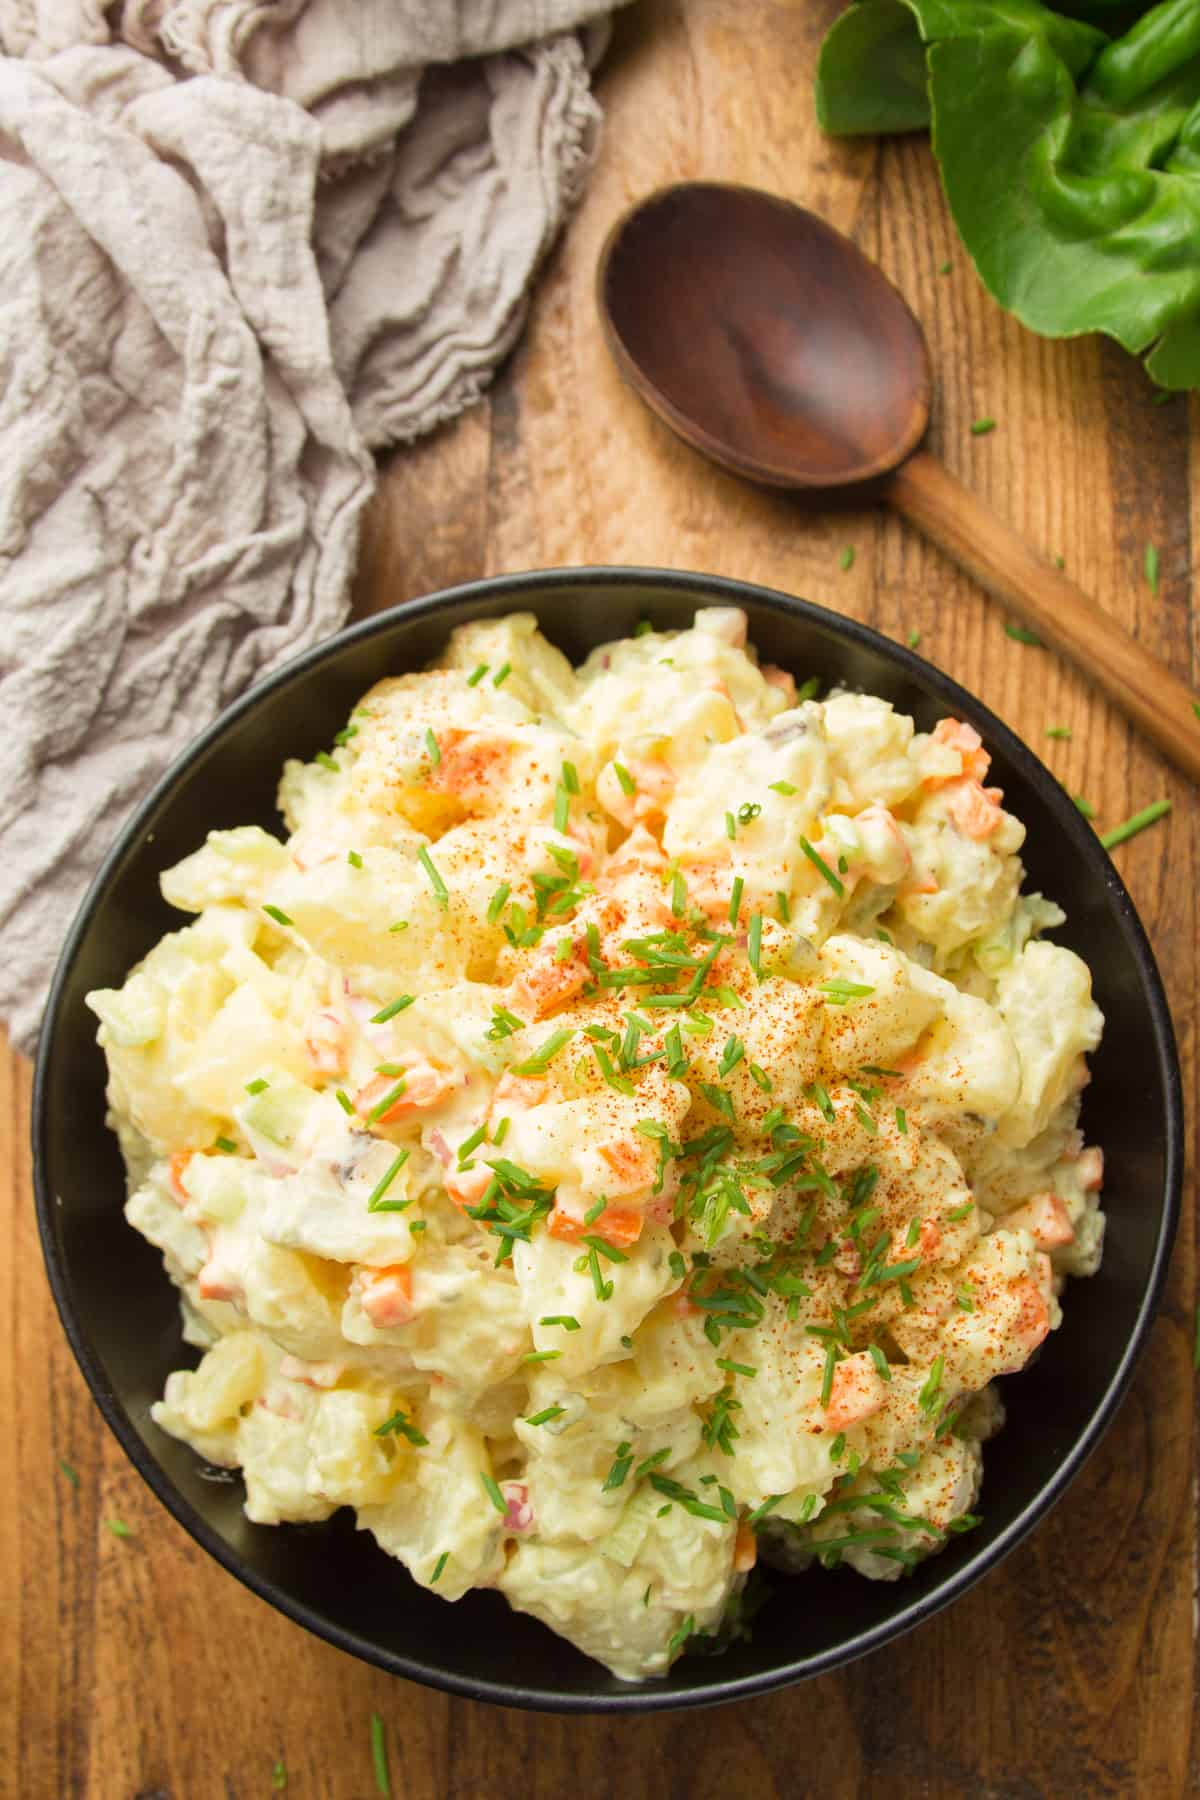 Bowl of Vegan Potato Salad on a Wooden Surface with Wooden Spoon on the Side